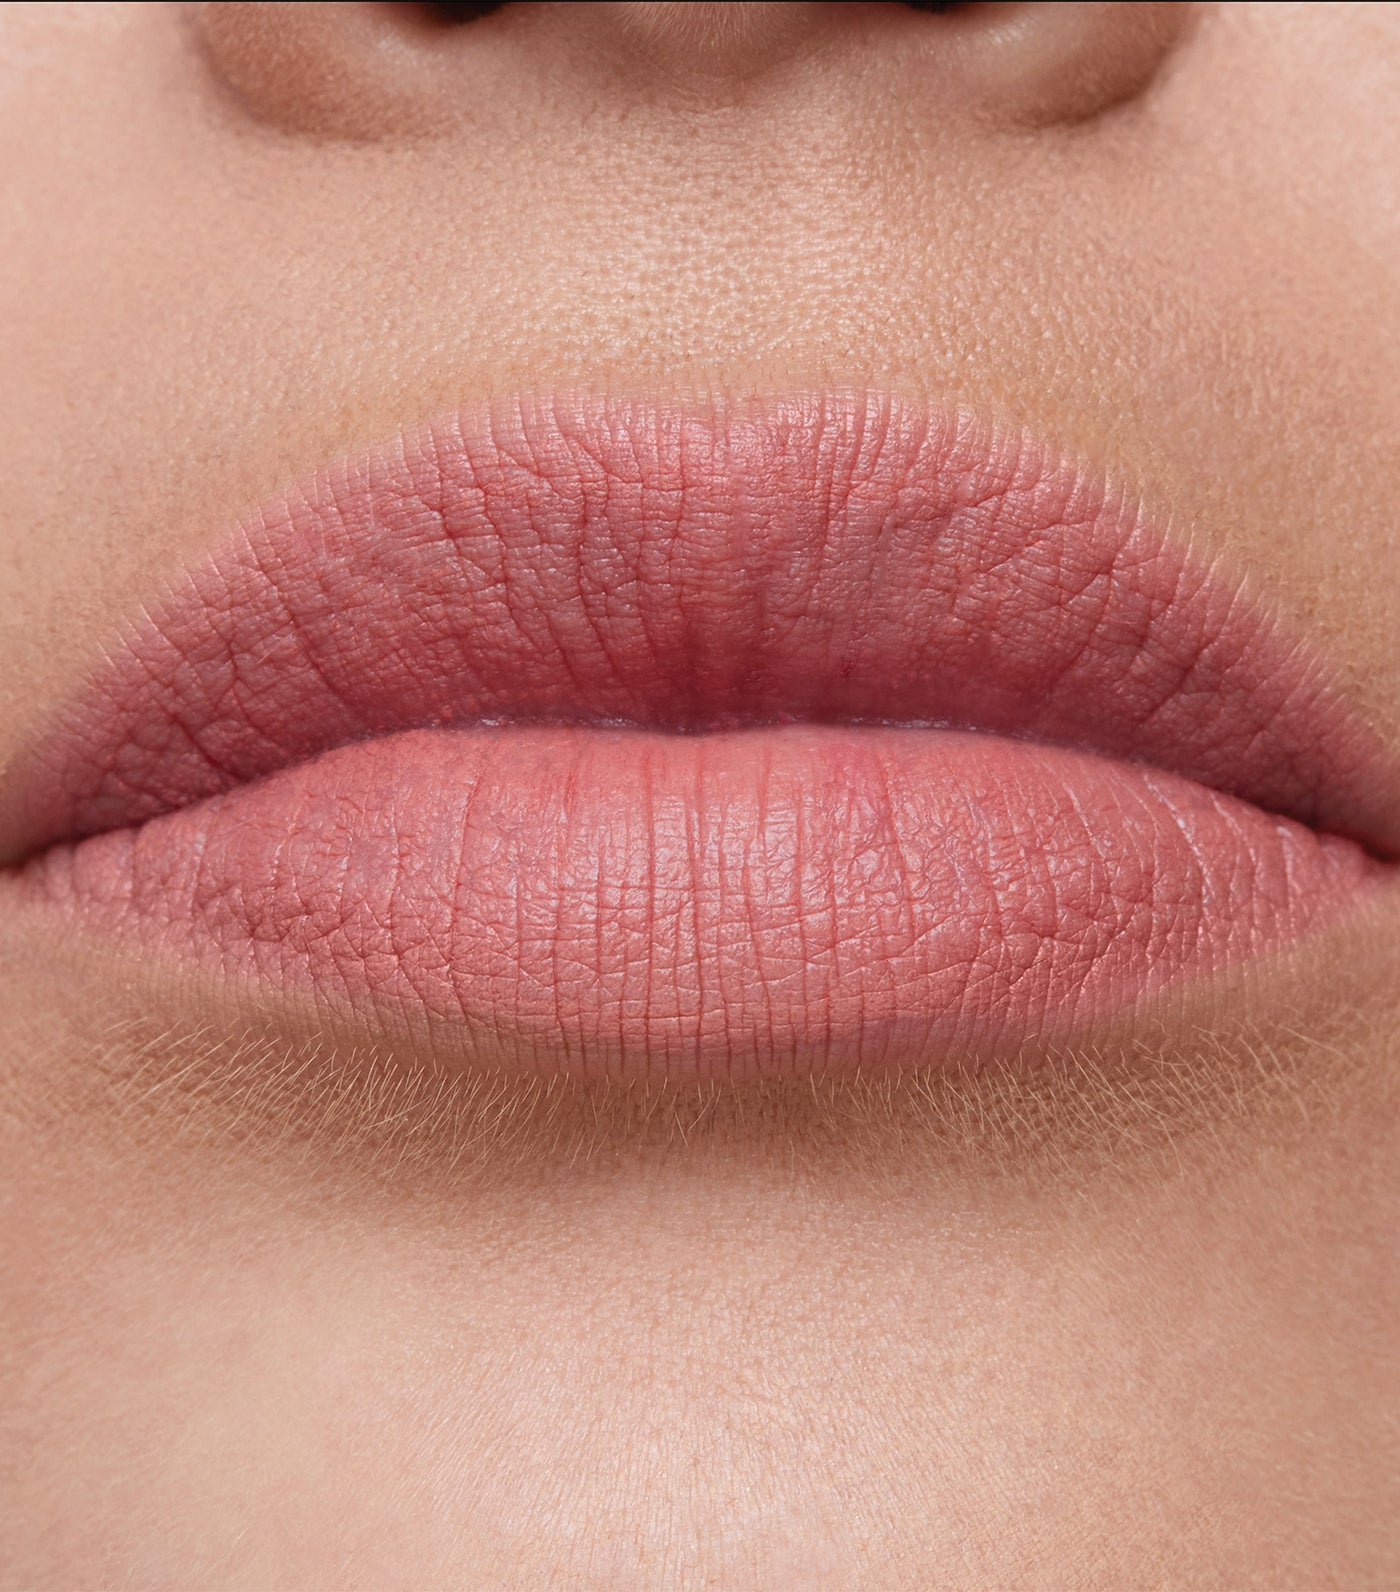 Stay All Day® Sheer Liquid Lipstick